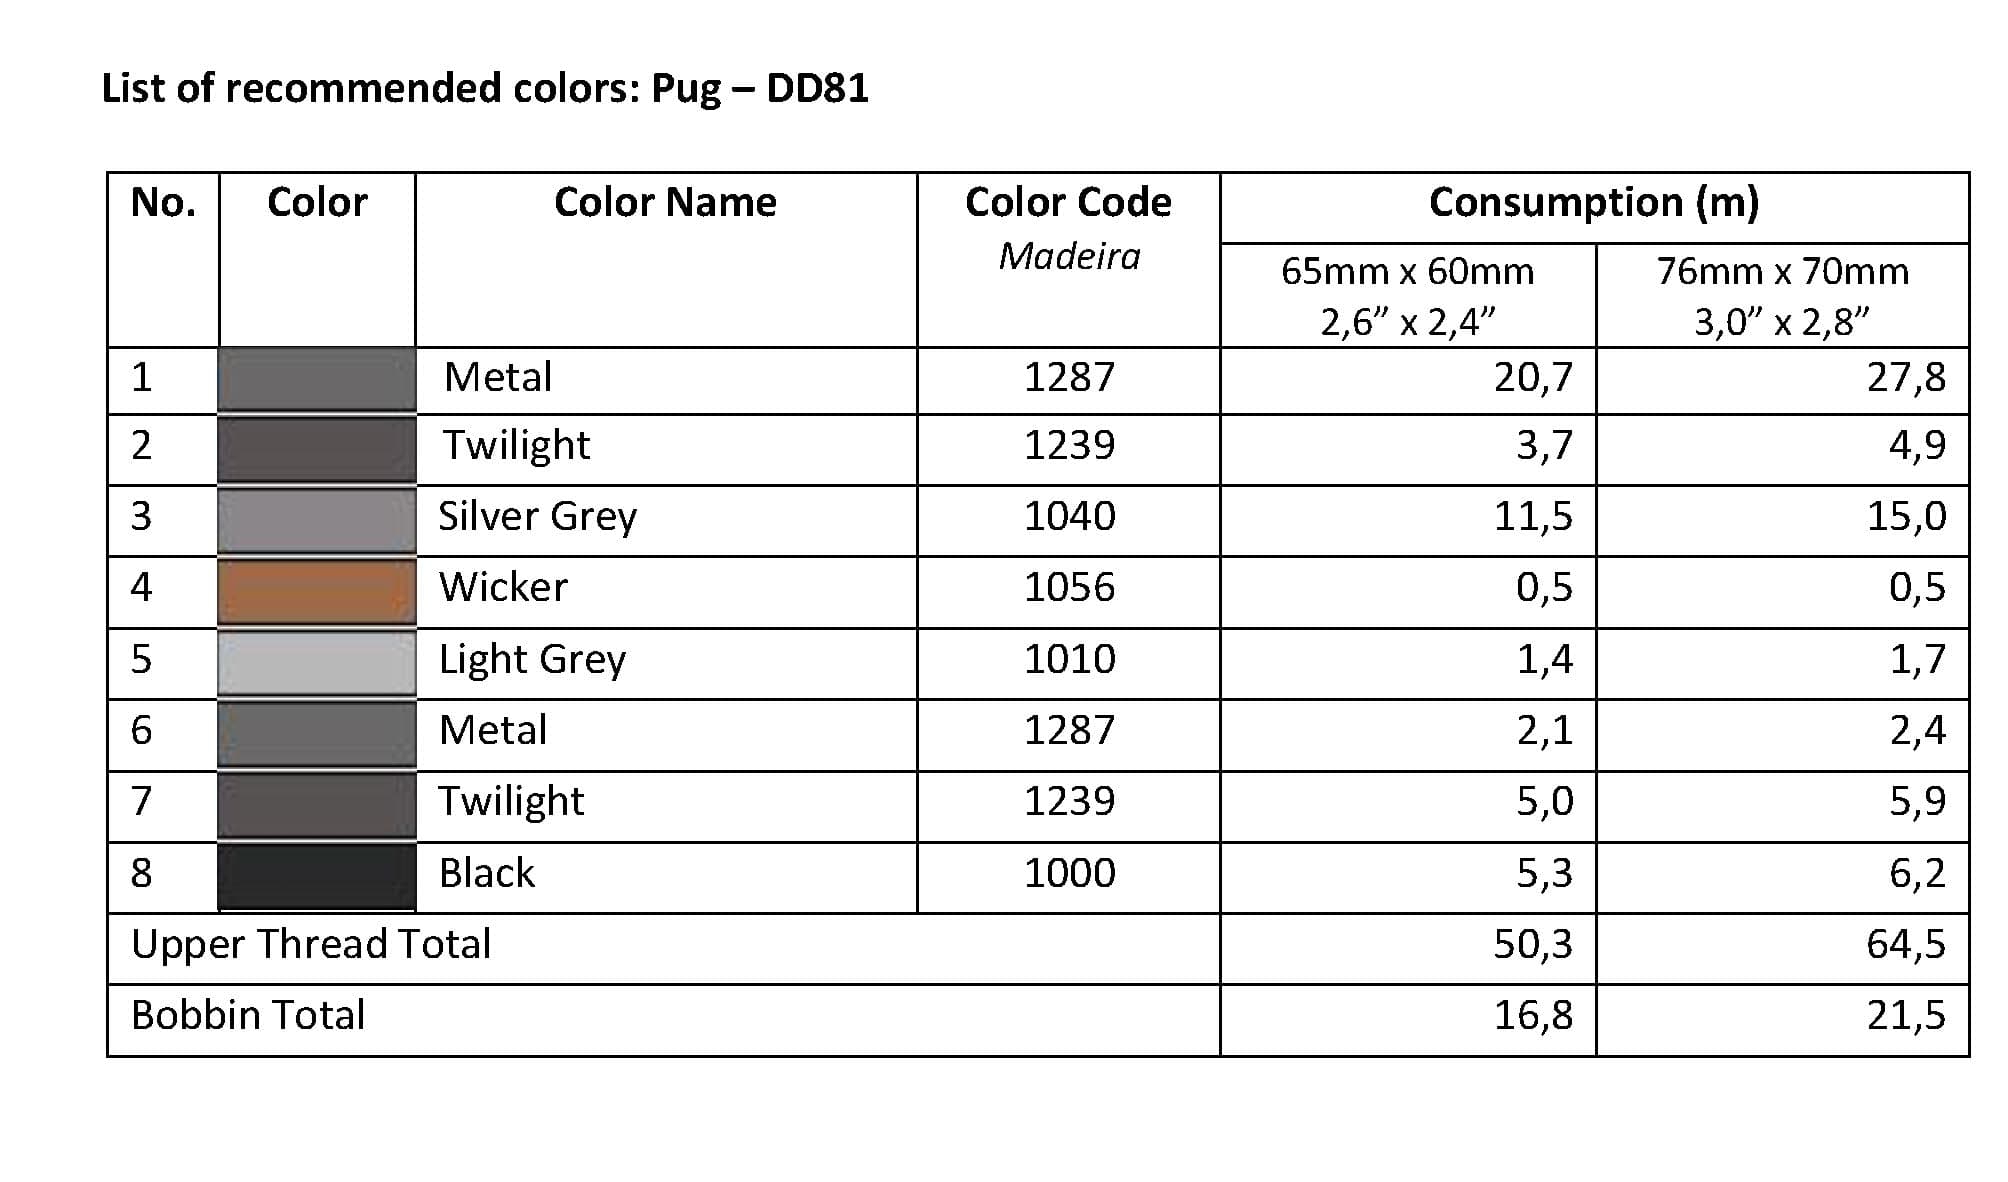 List of Recommended Colors -  Pug DD81